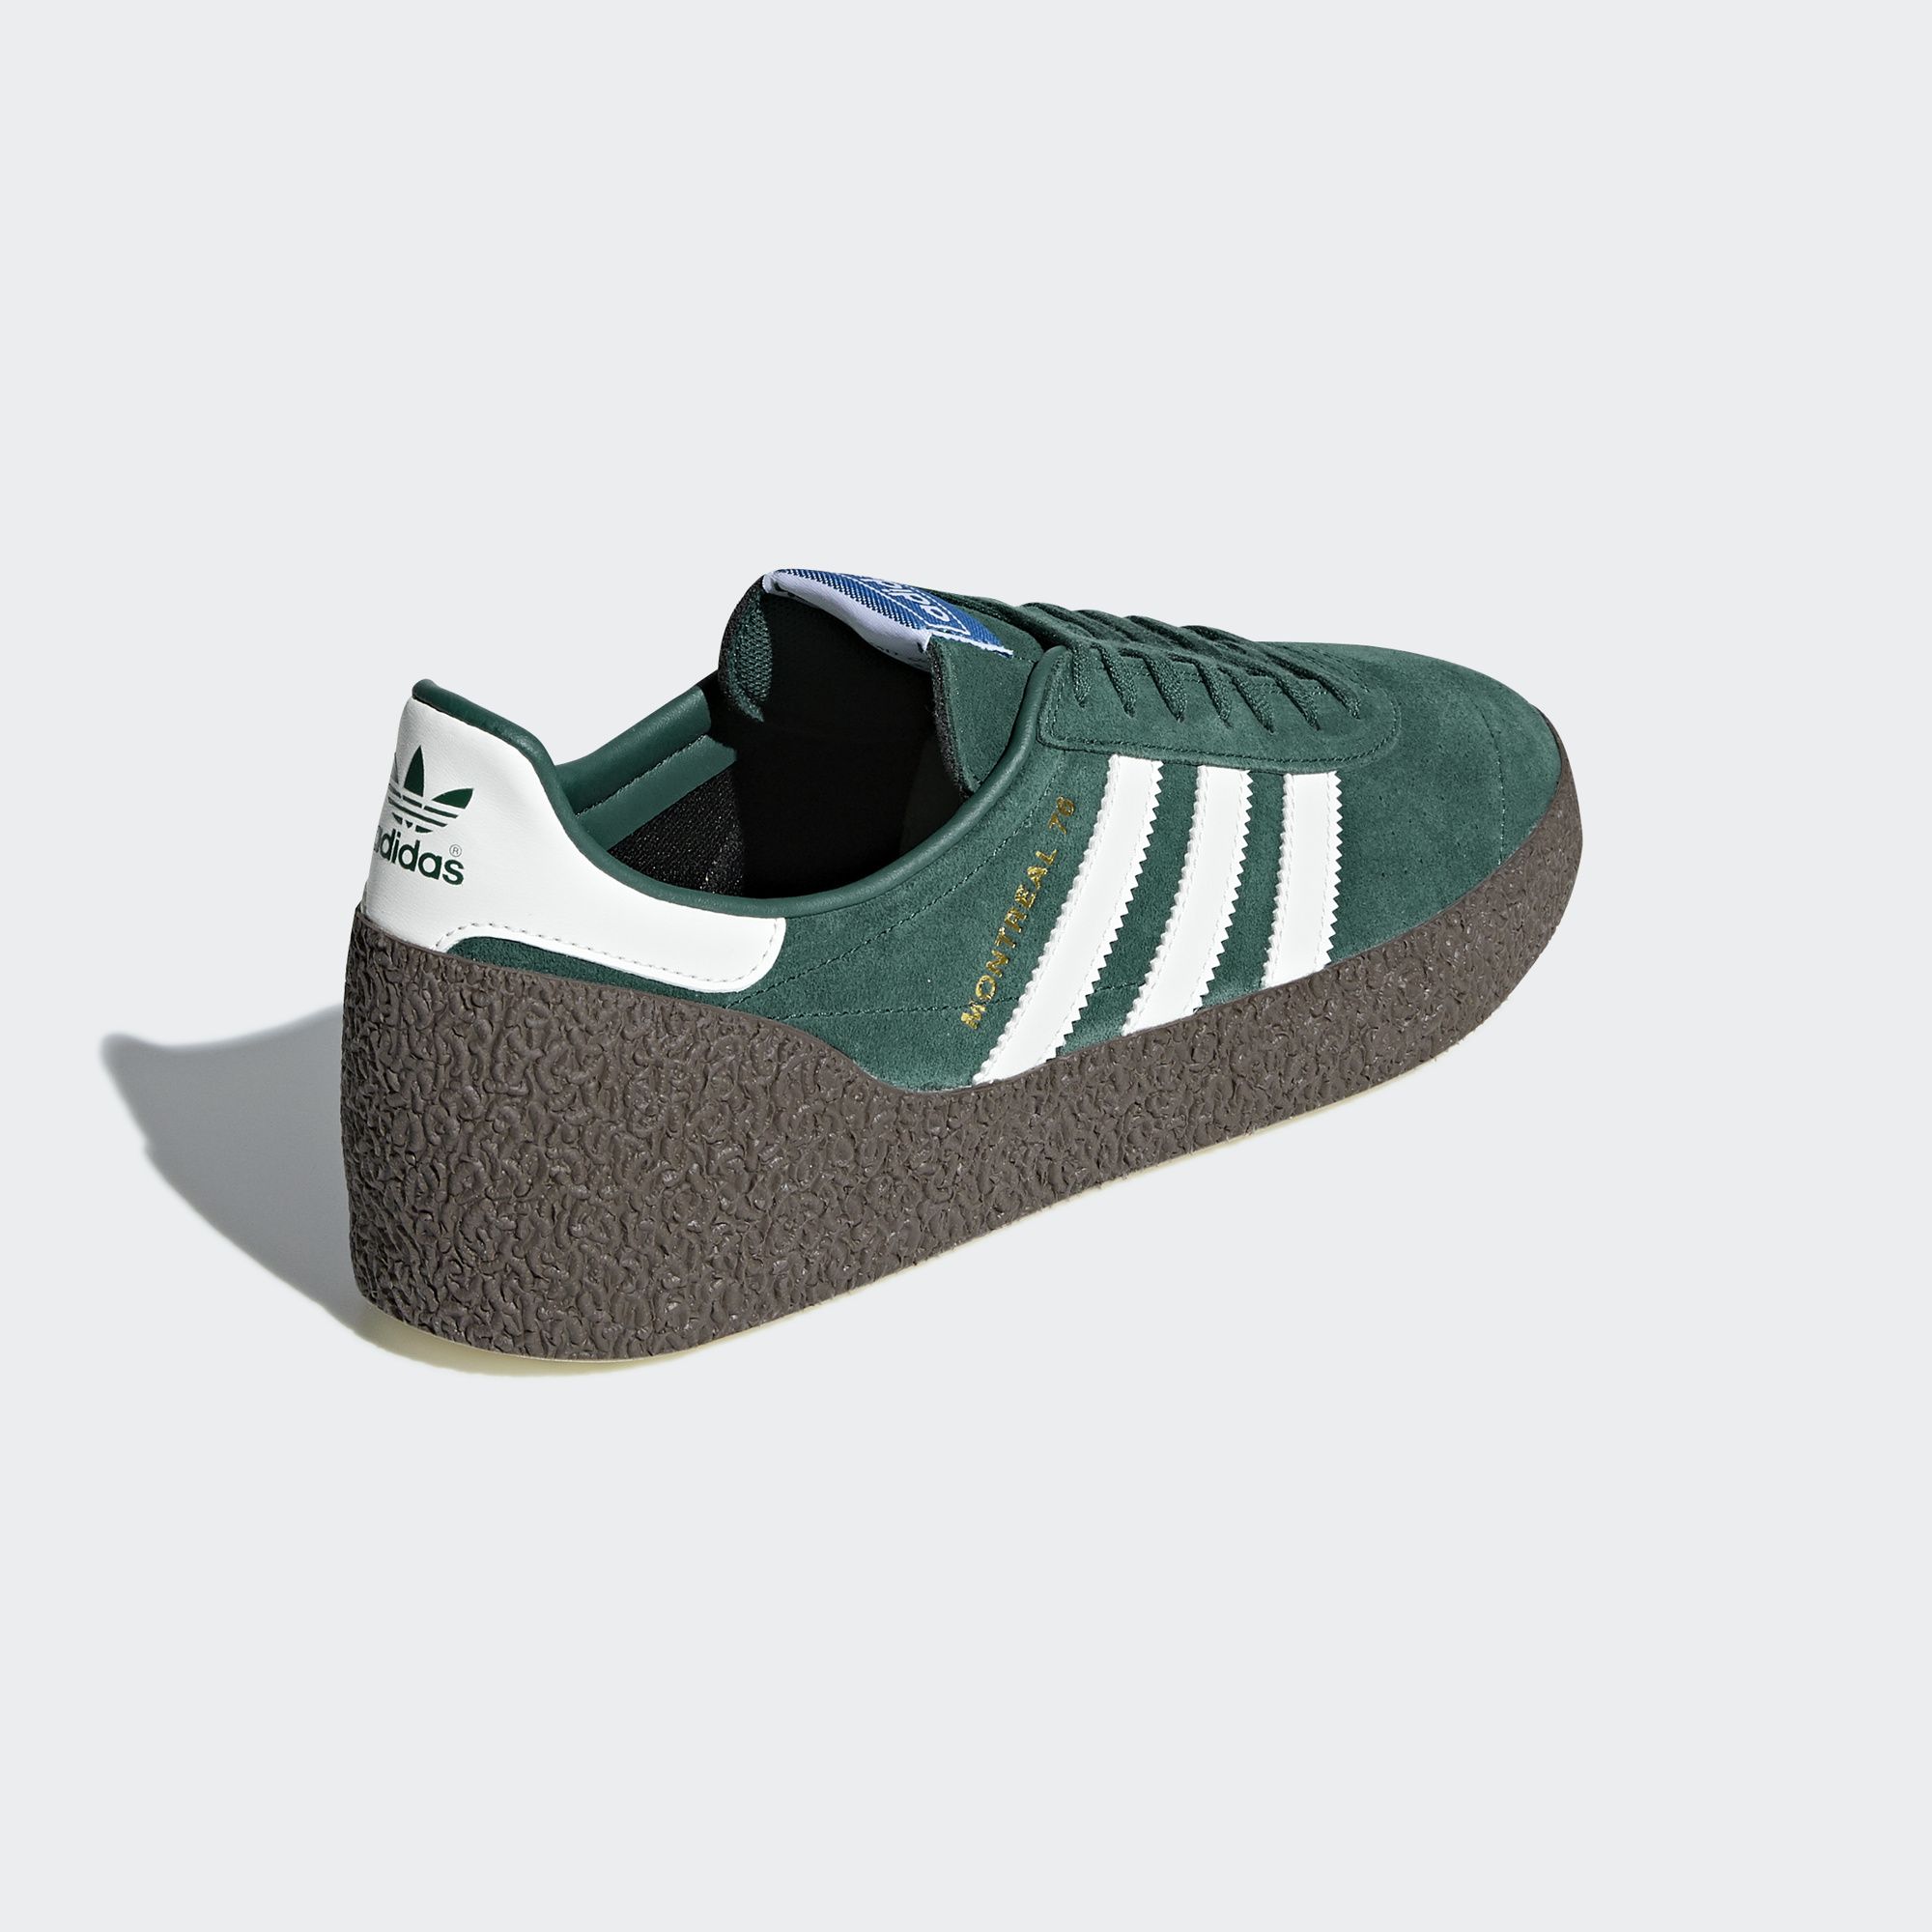 Adidas Originals Montreal '76 Trainers - Noble Green/Off White